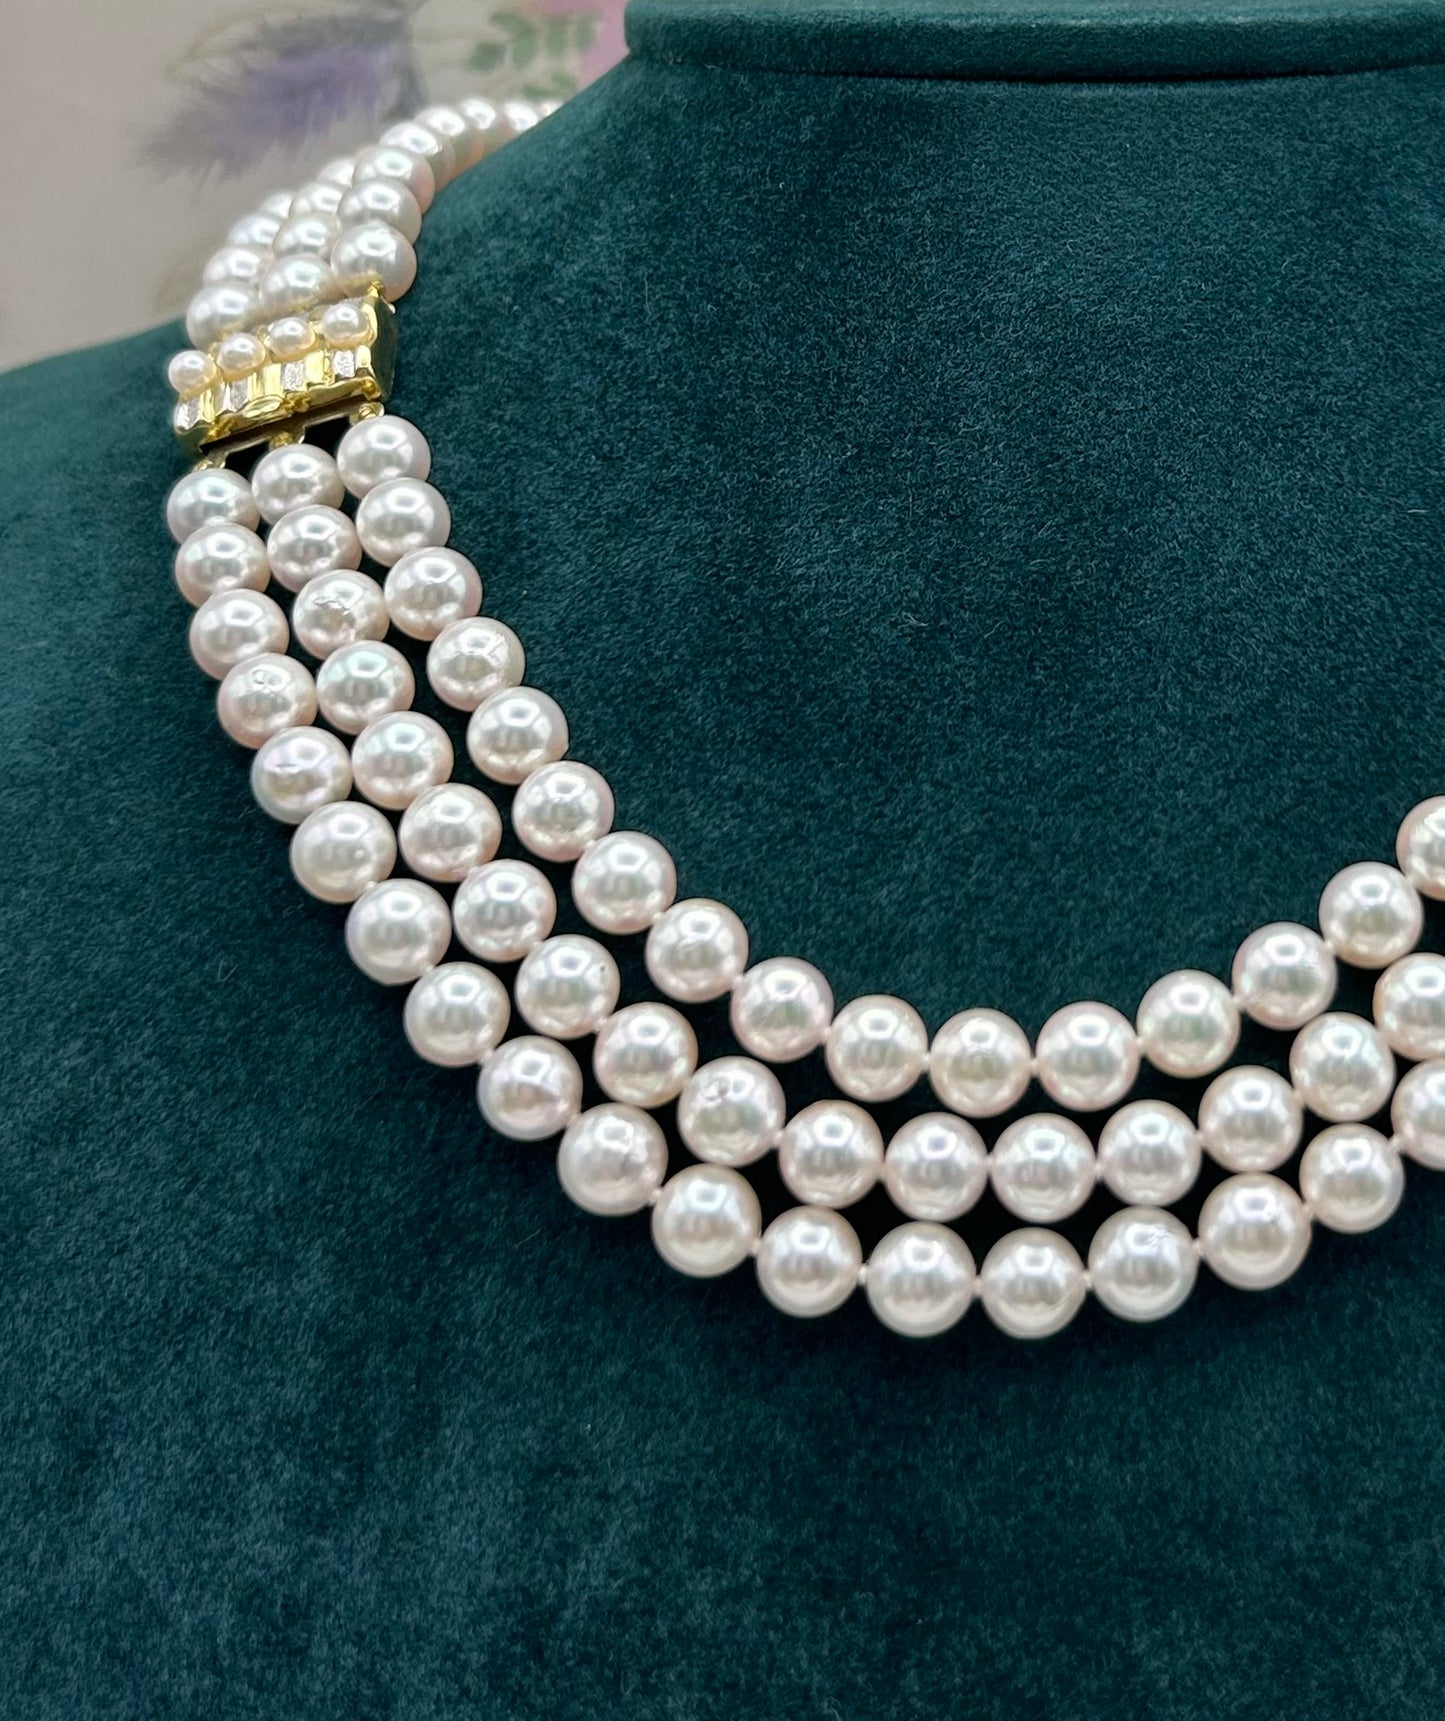 Triple Row of Cultured Pearl Necklace